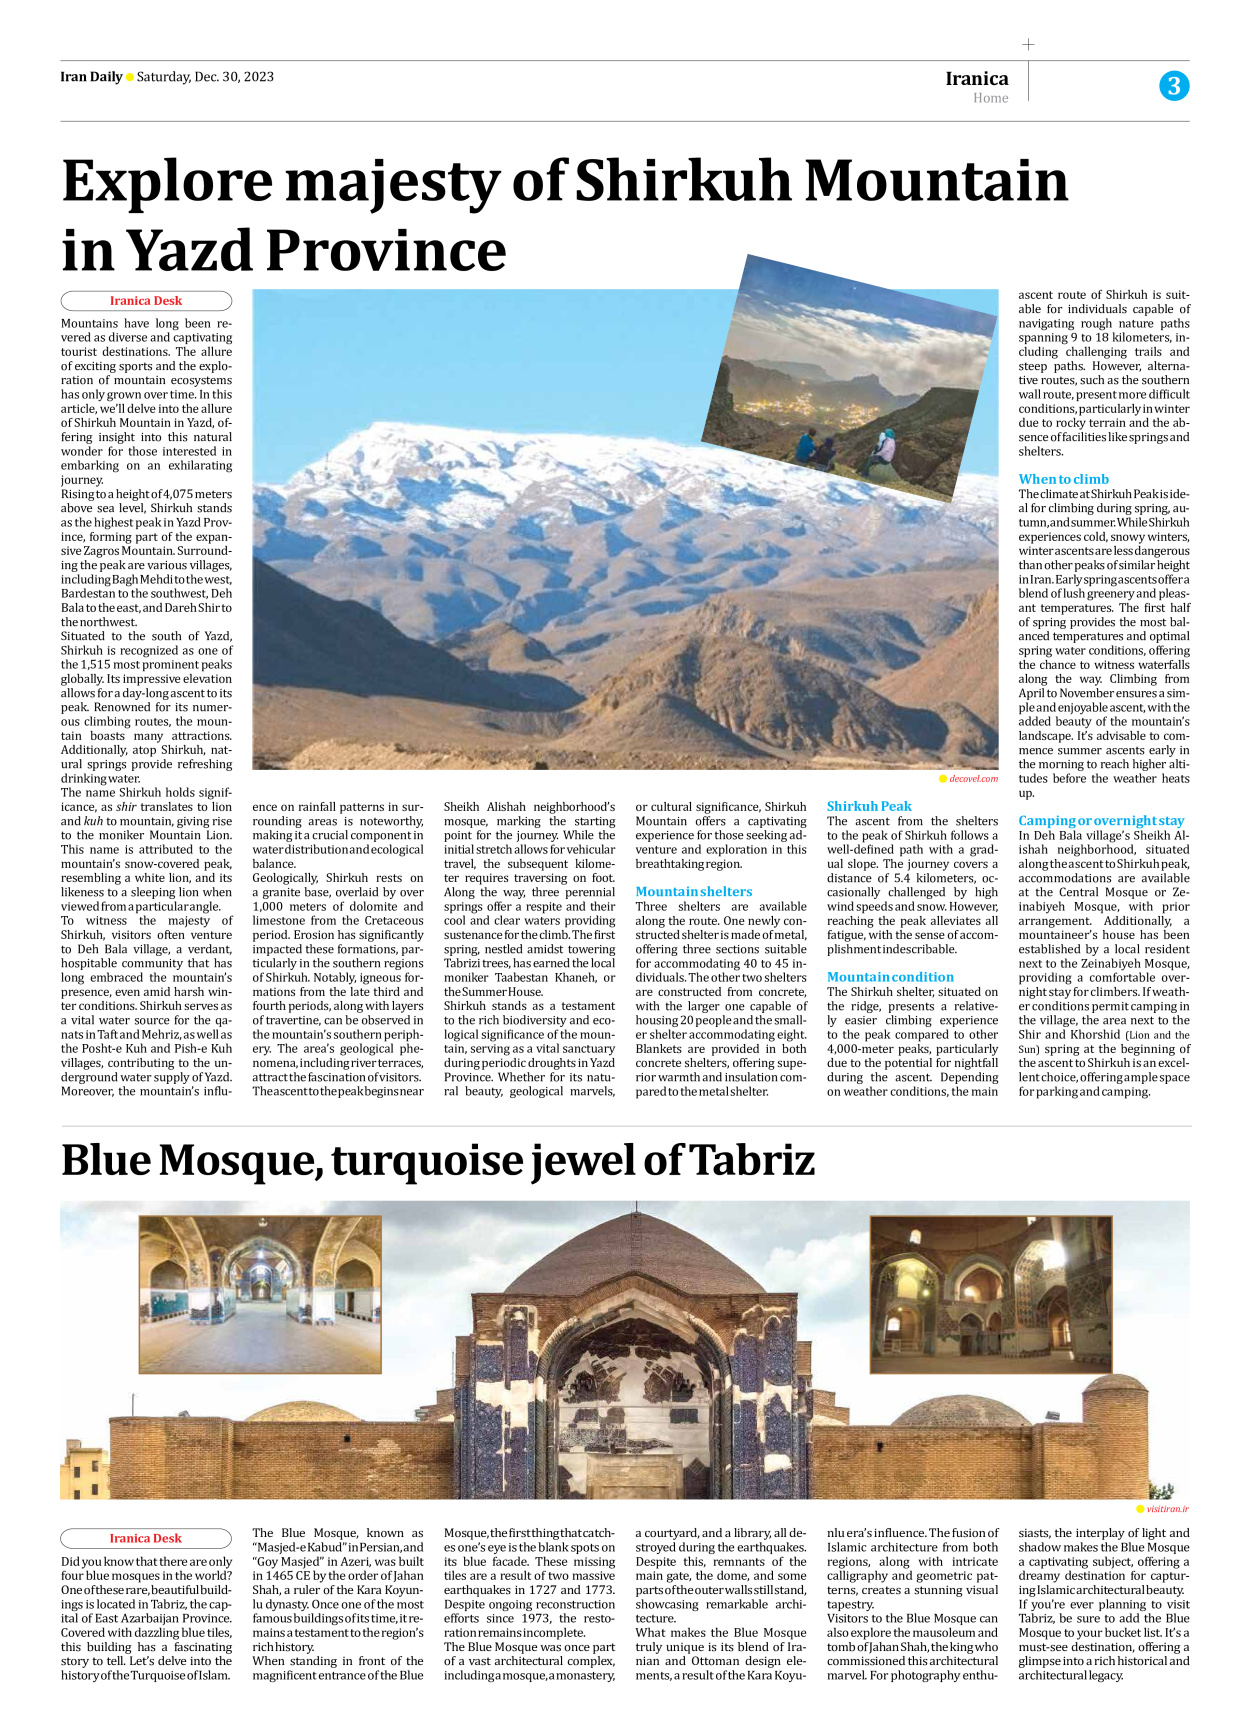 Iran Daily - Number Seven Thousand Four Hundred and Seventy One - 30 December 2023 - Page 3